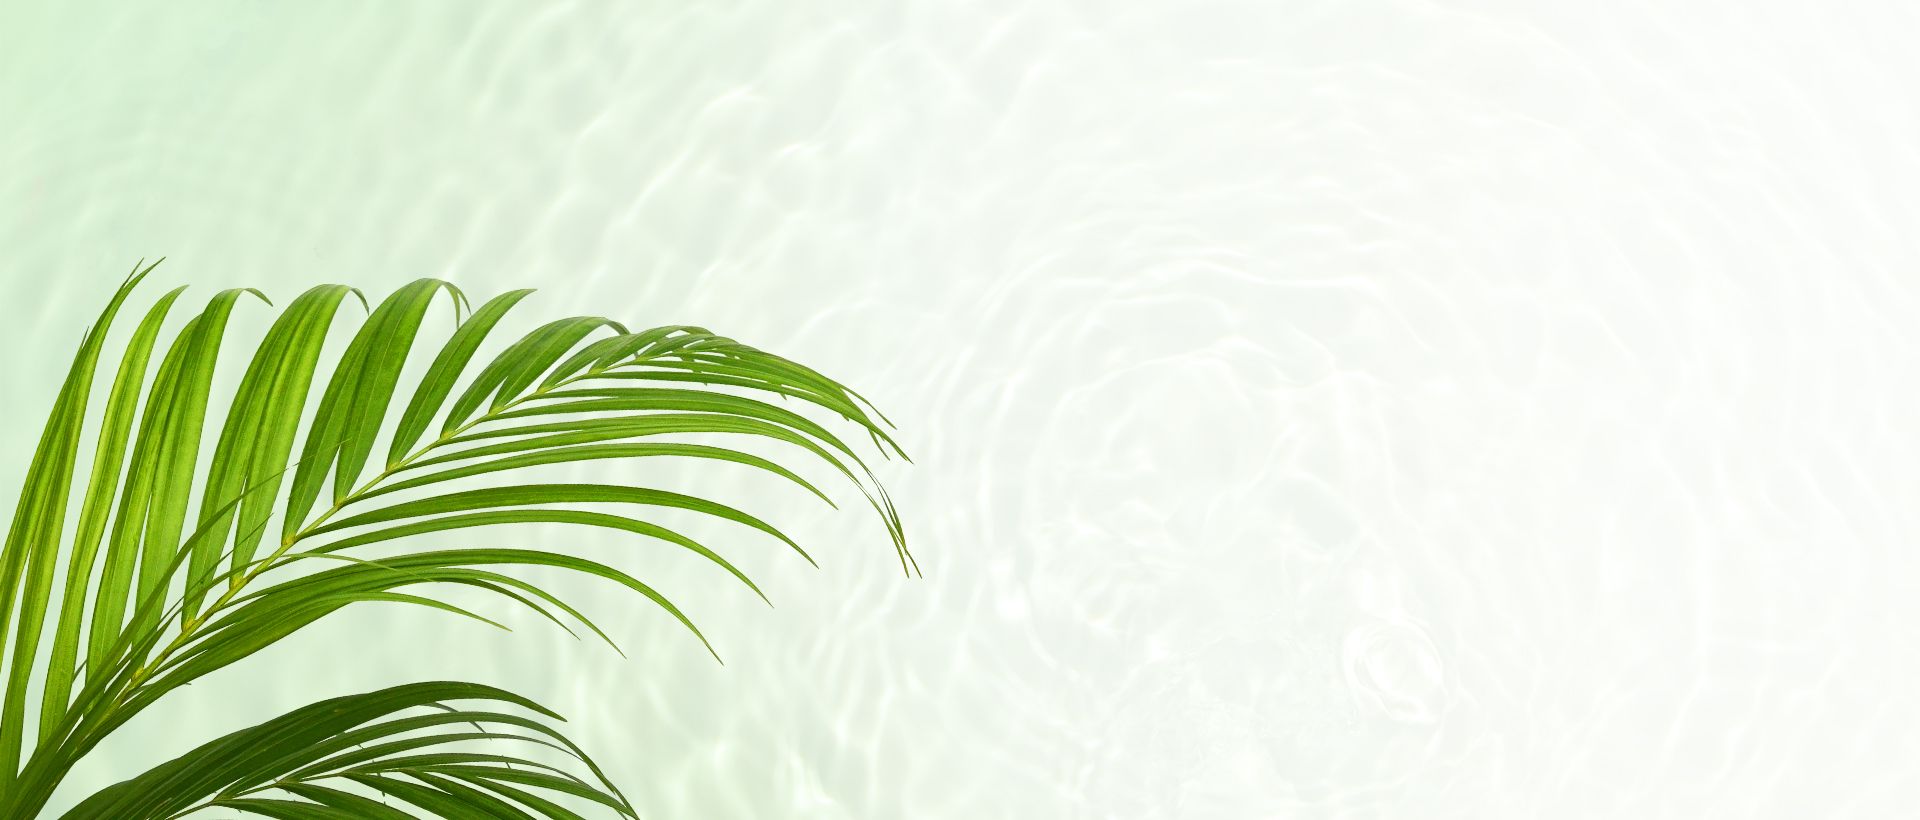 Water and palm leaves